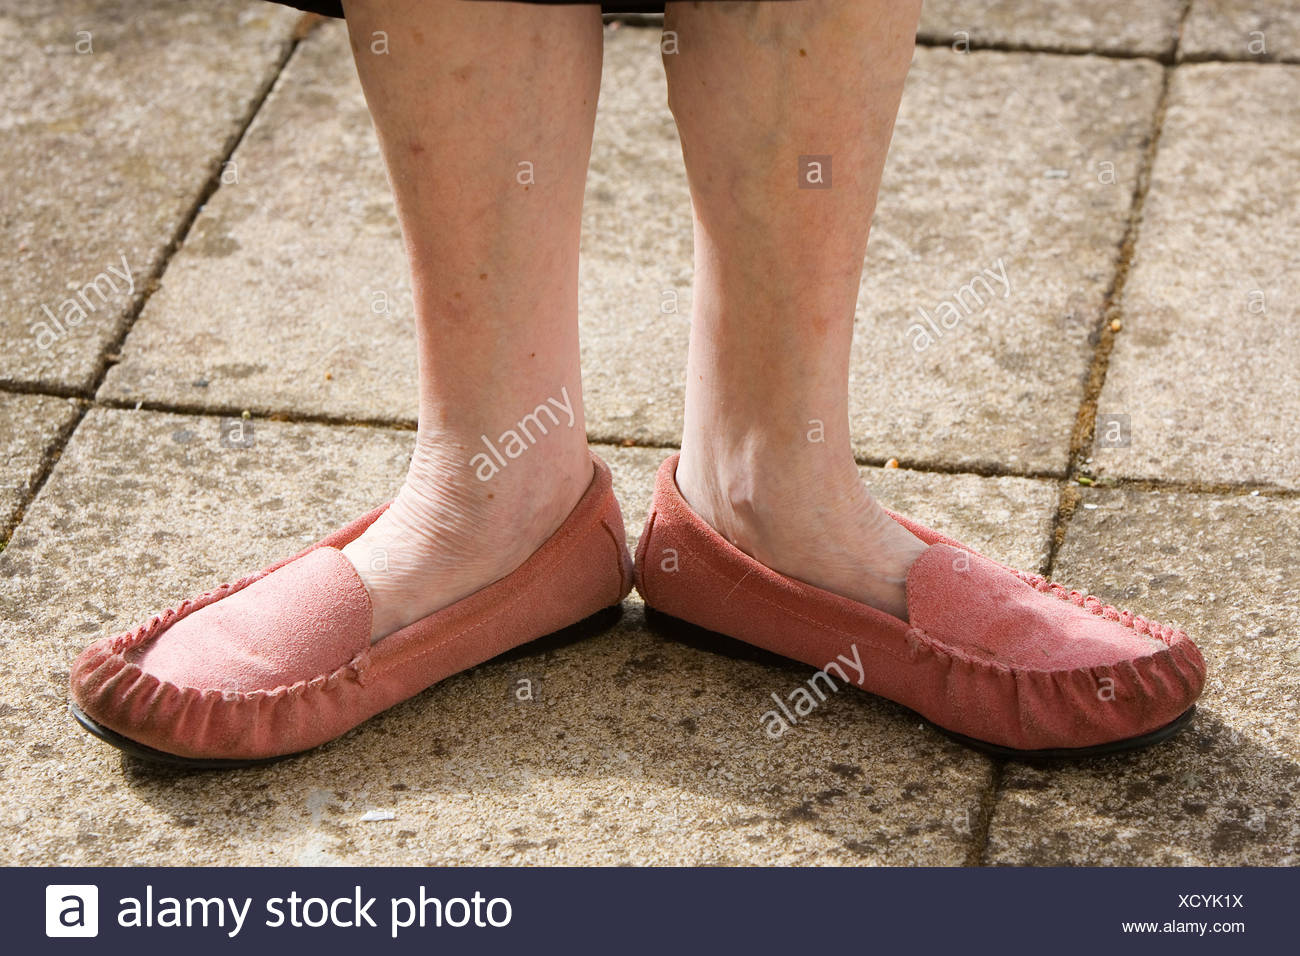 slippers for the elderly woman